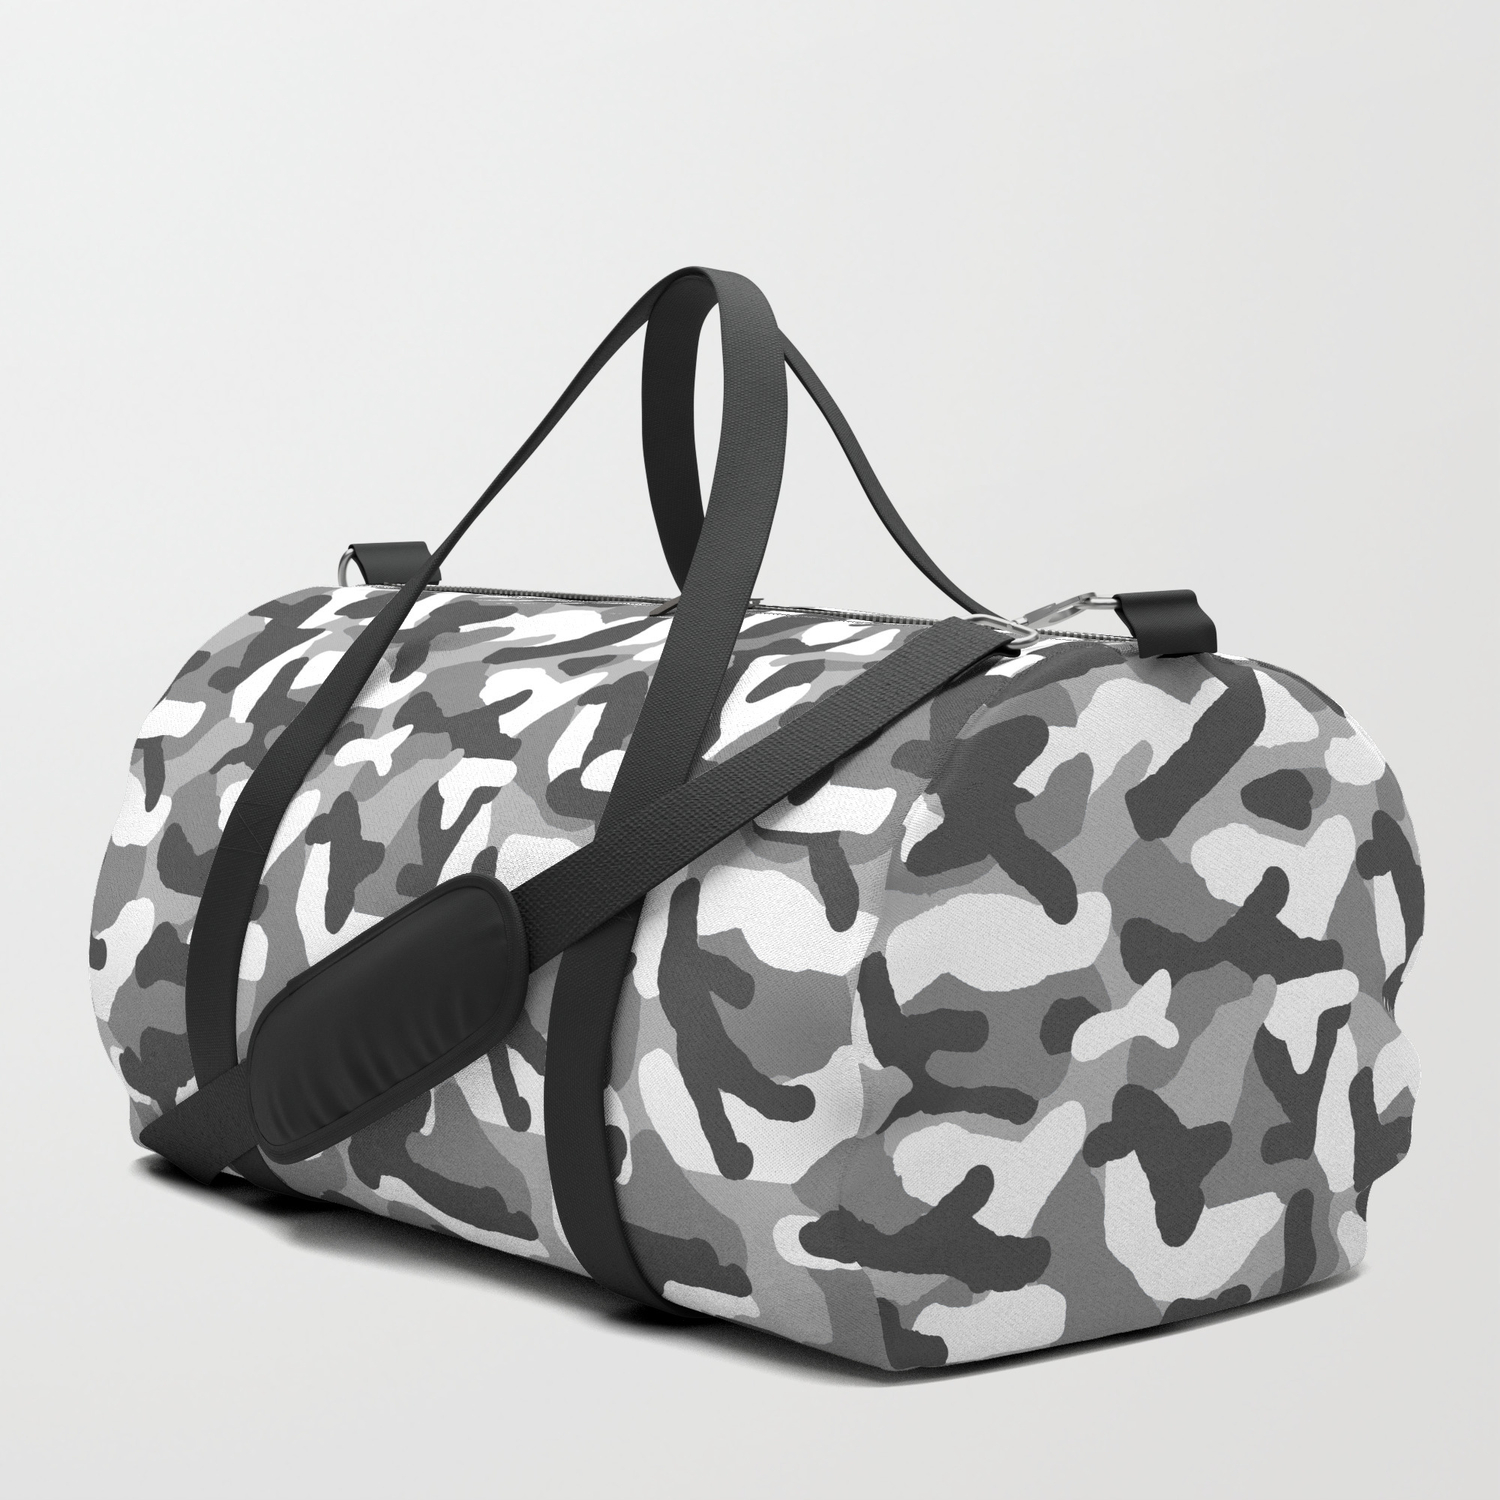 TFONE Gray Camo Camouflage Duffel Bag Sports Gym Weekend Bags with Shoe Compartmen 